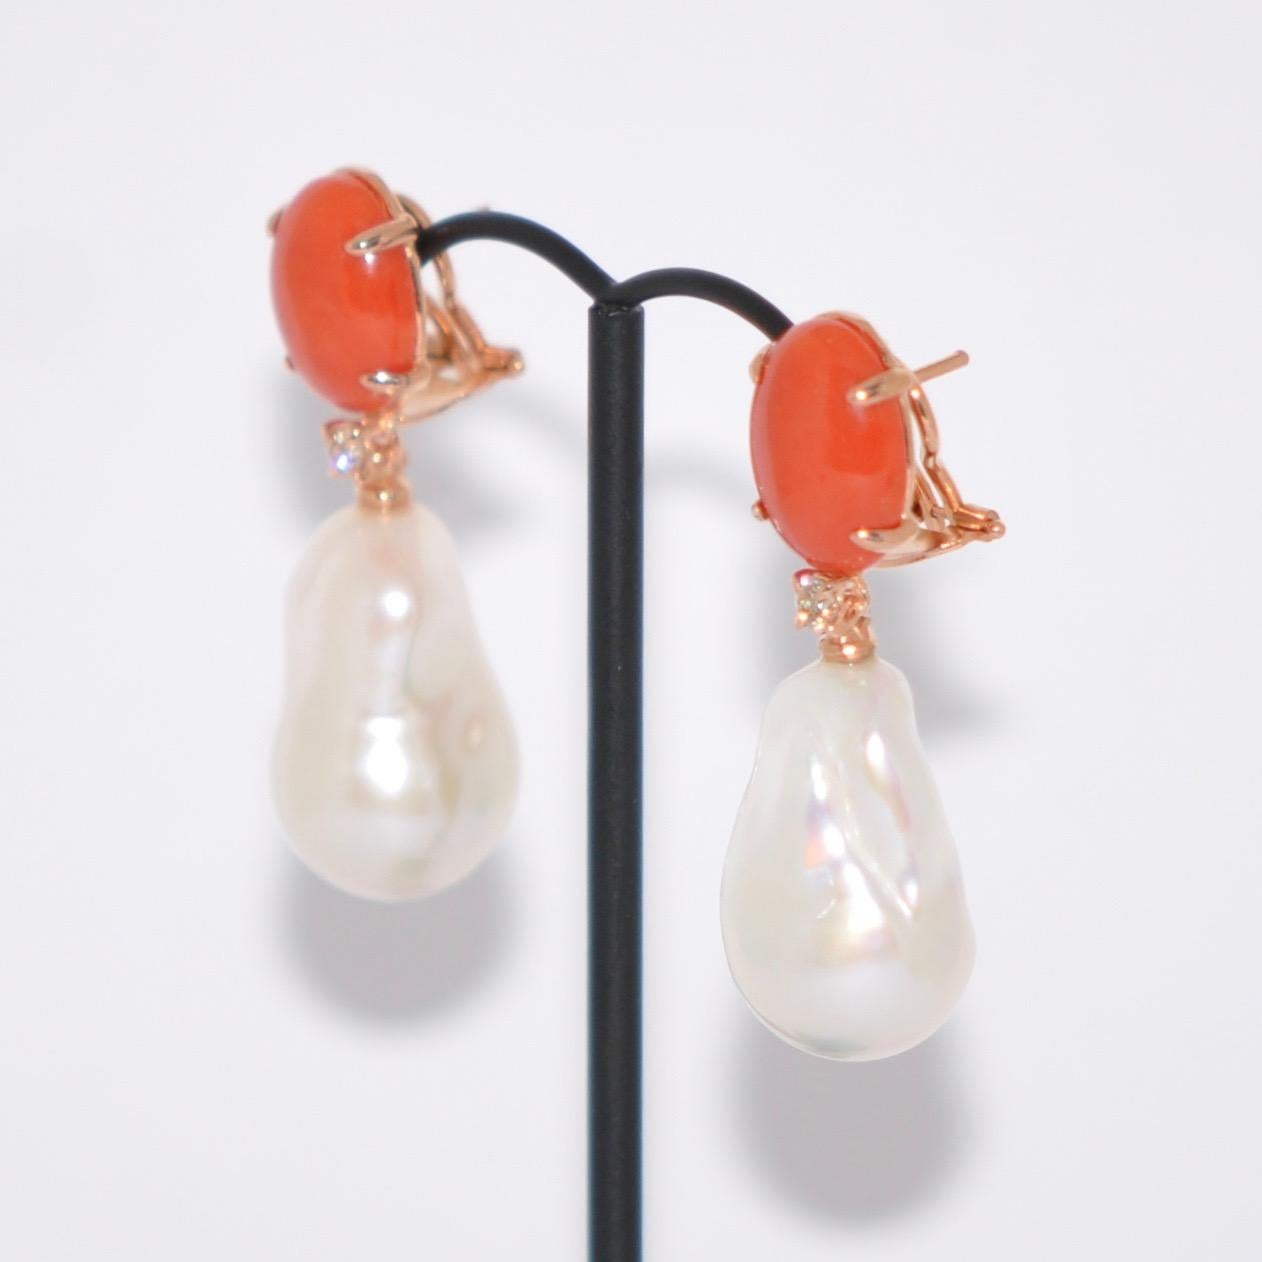 Discover this Coral and Baroque Pearls White Diamonds on Rose Gold 18 Chandelier Earrings.
Coral
Baroque Pearls
White Diamonds 0.16K 
Rose Gold 18 Karat
